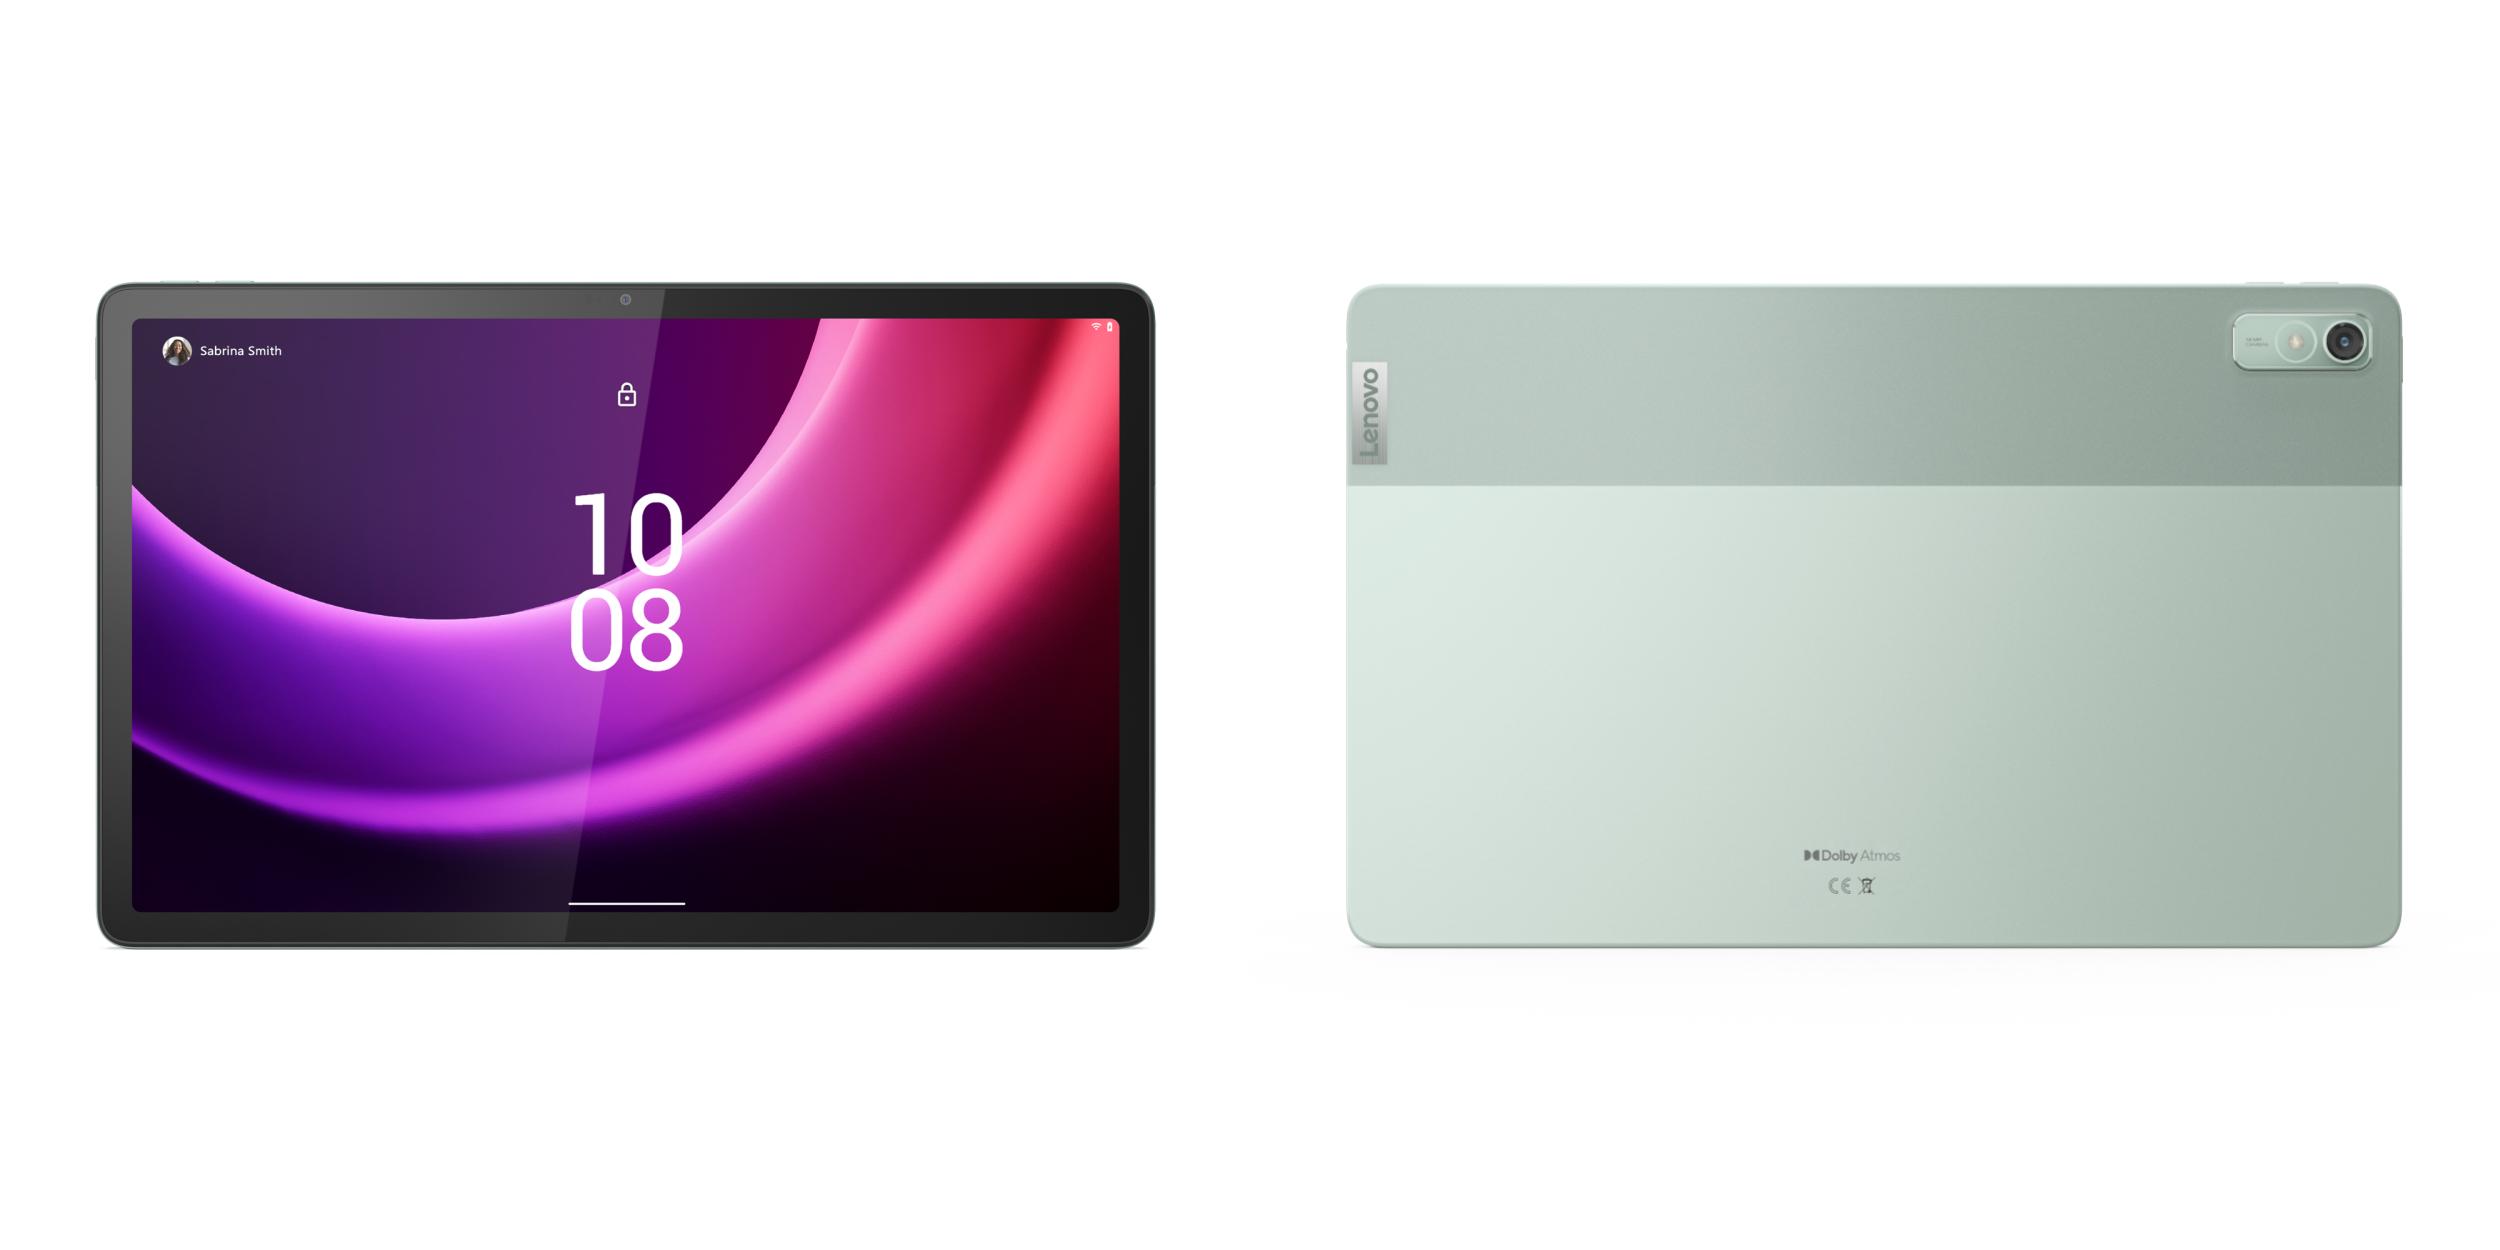 Lenovo releasing $249 Android 12L tablet next year - 9to5Google